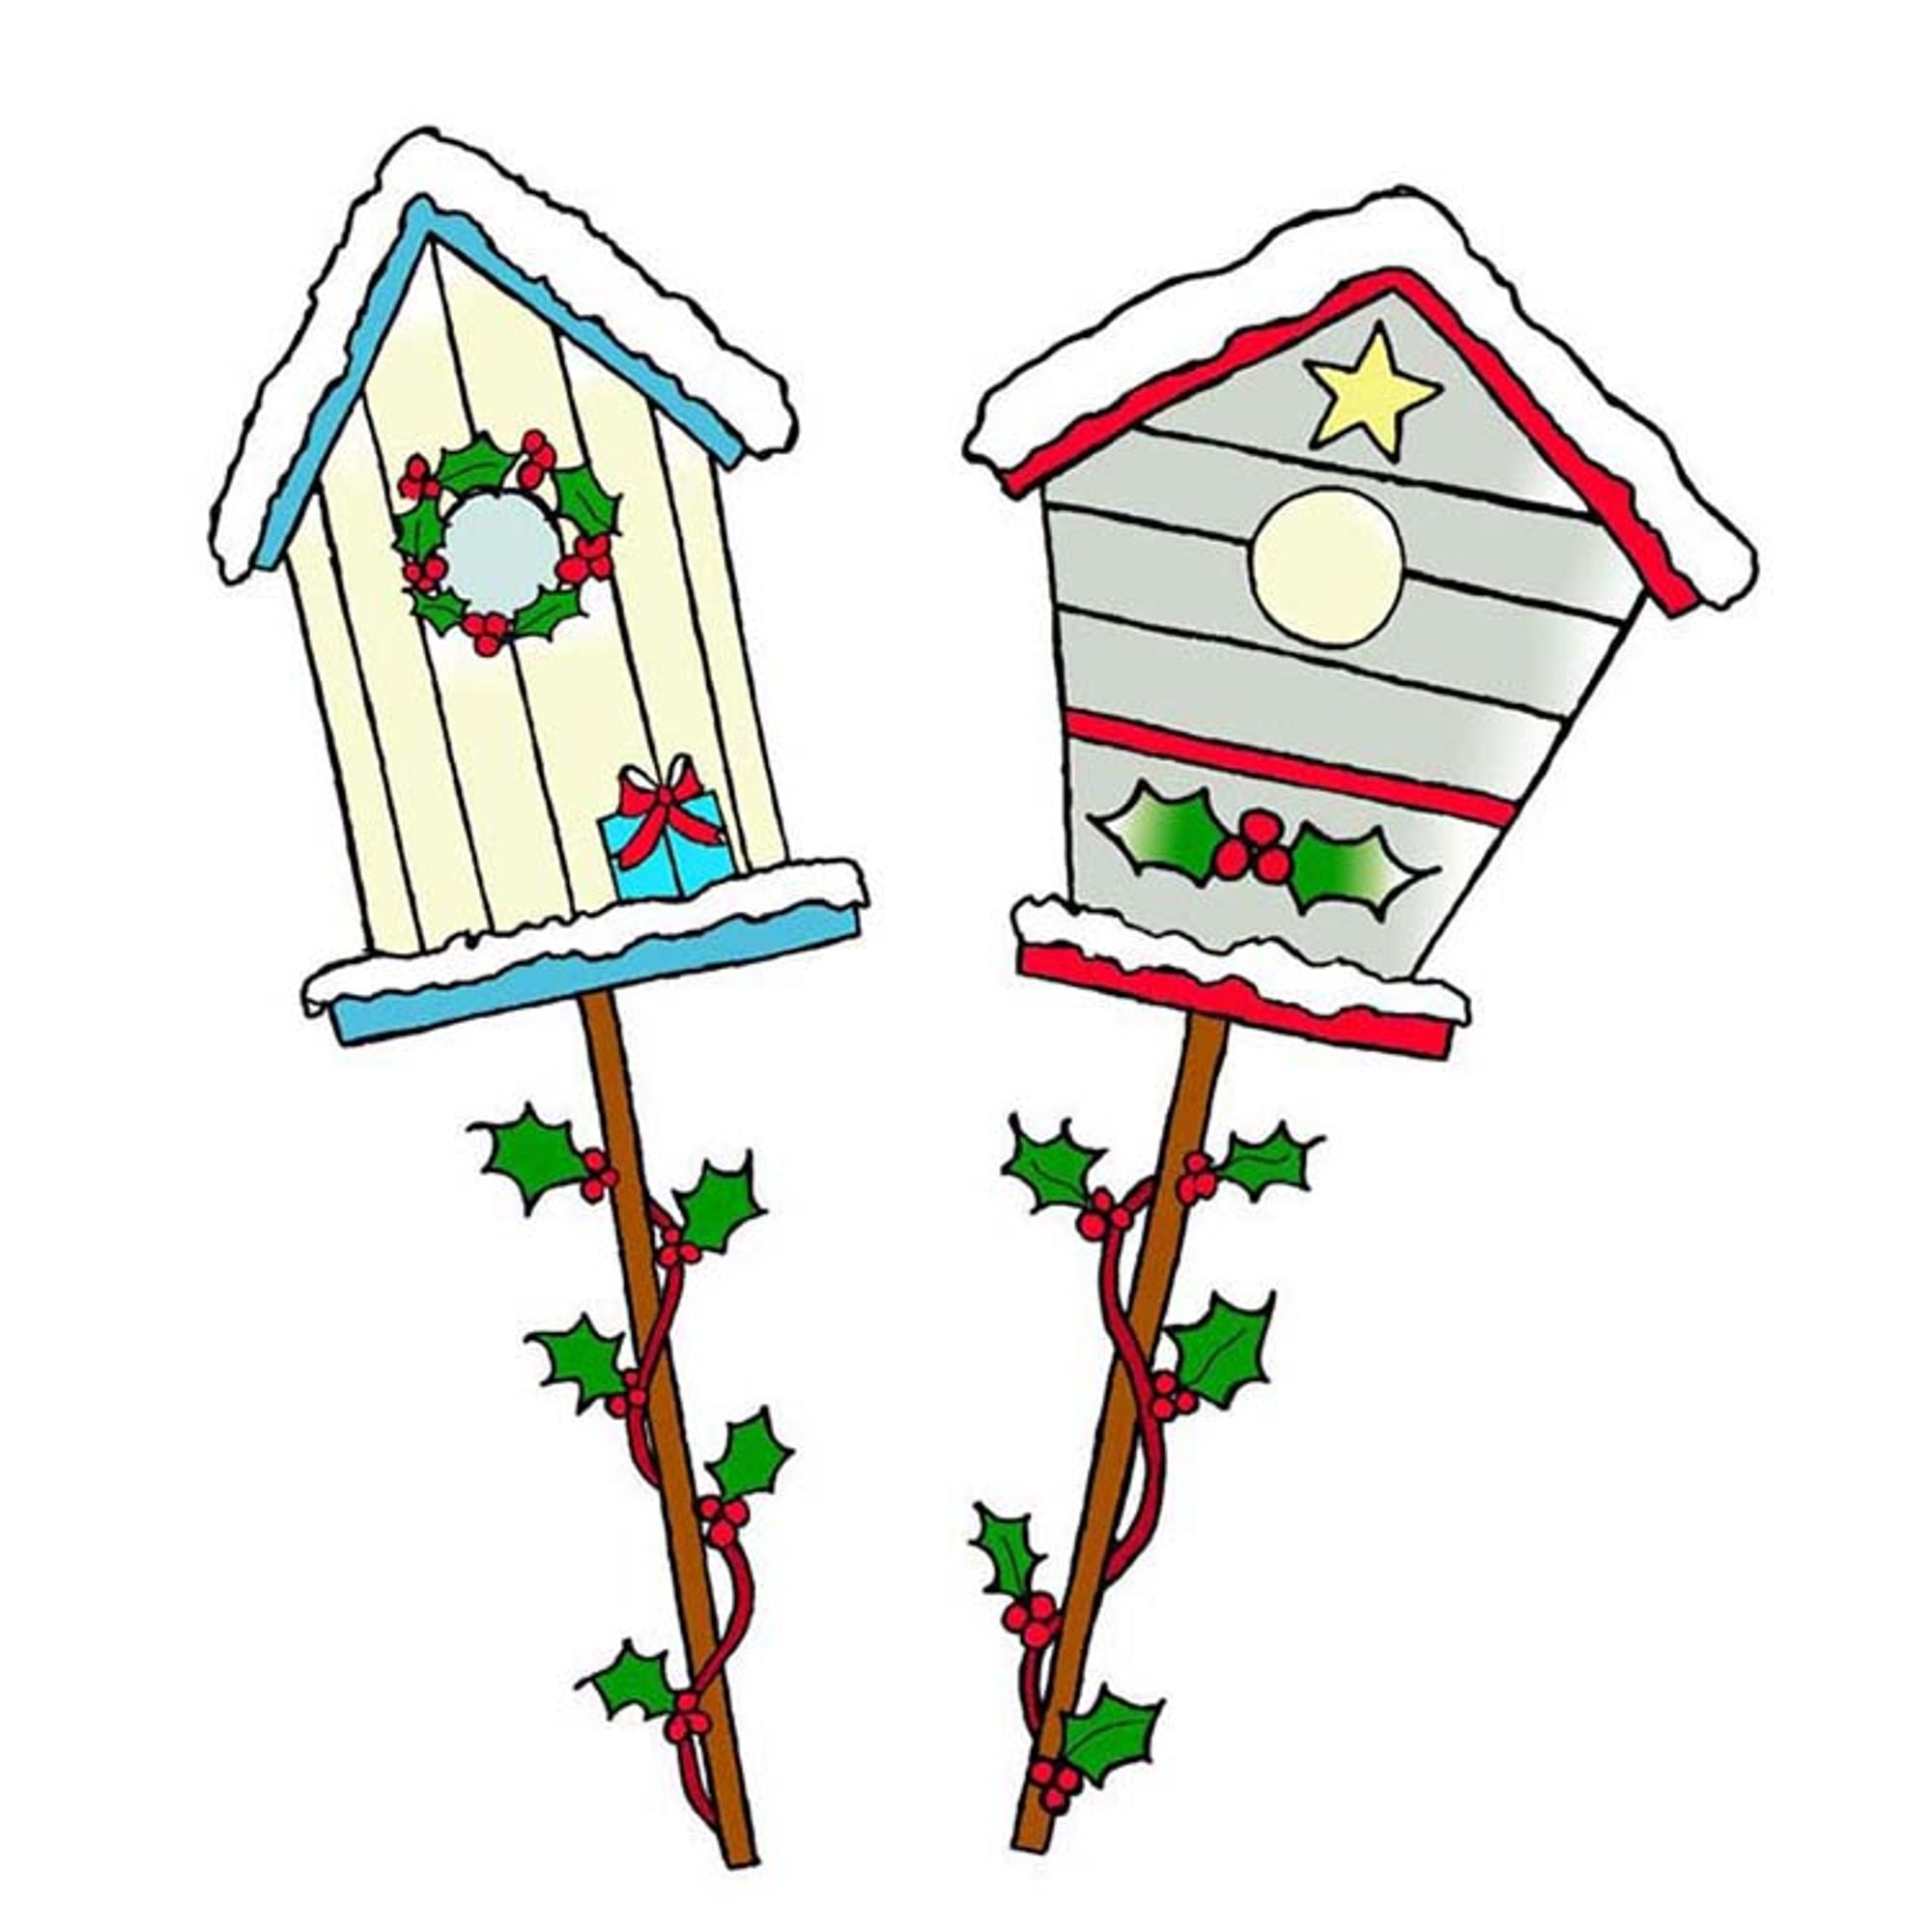 Frog's Whiskers Ink Stamp - Winter Bird Houses